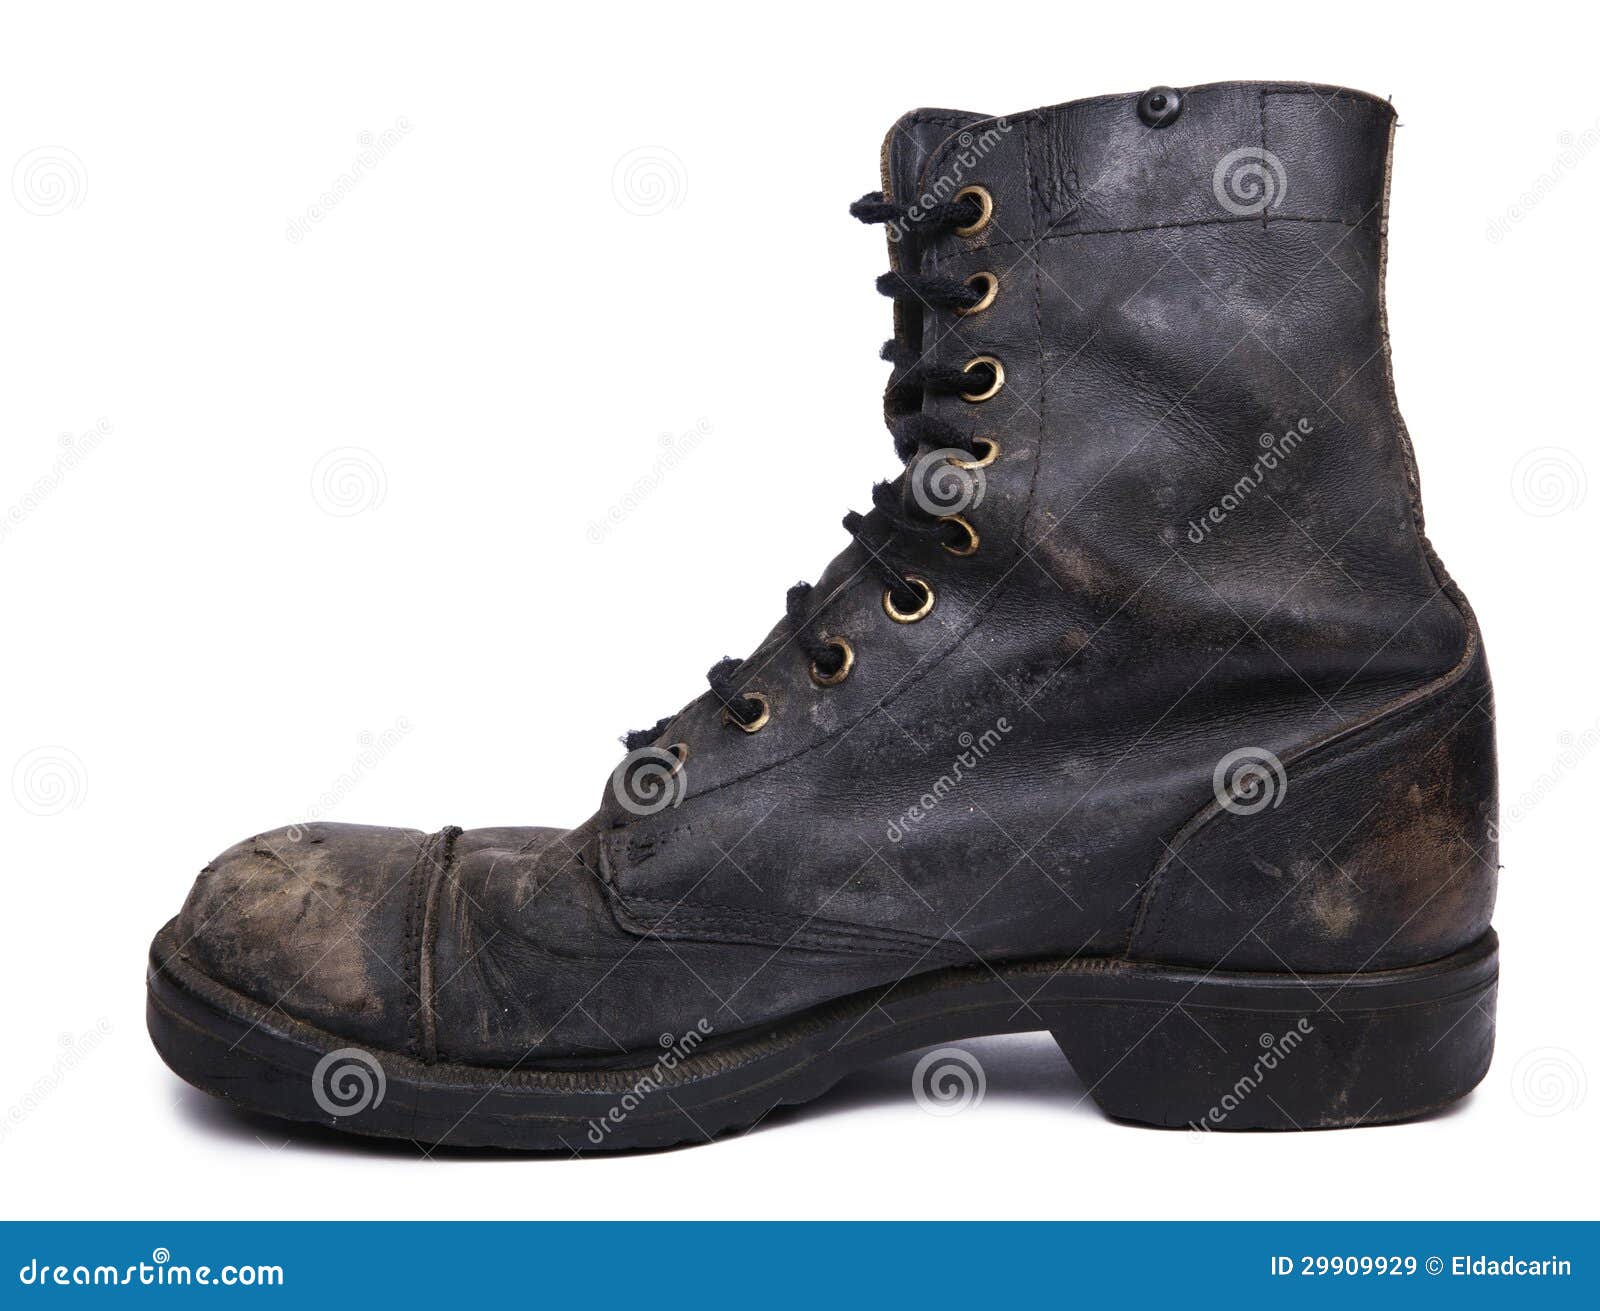 Download Isolated Used Army Boot - Inner Side View Stock Image ...